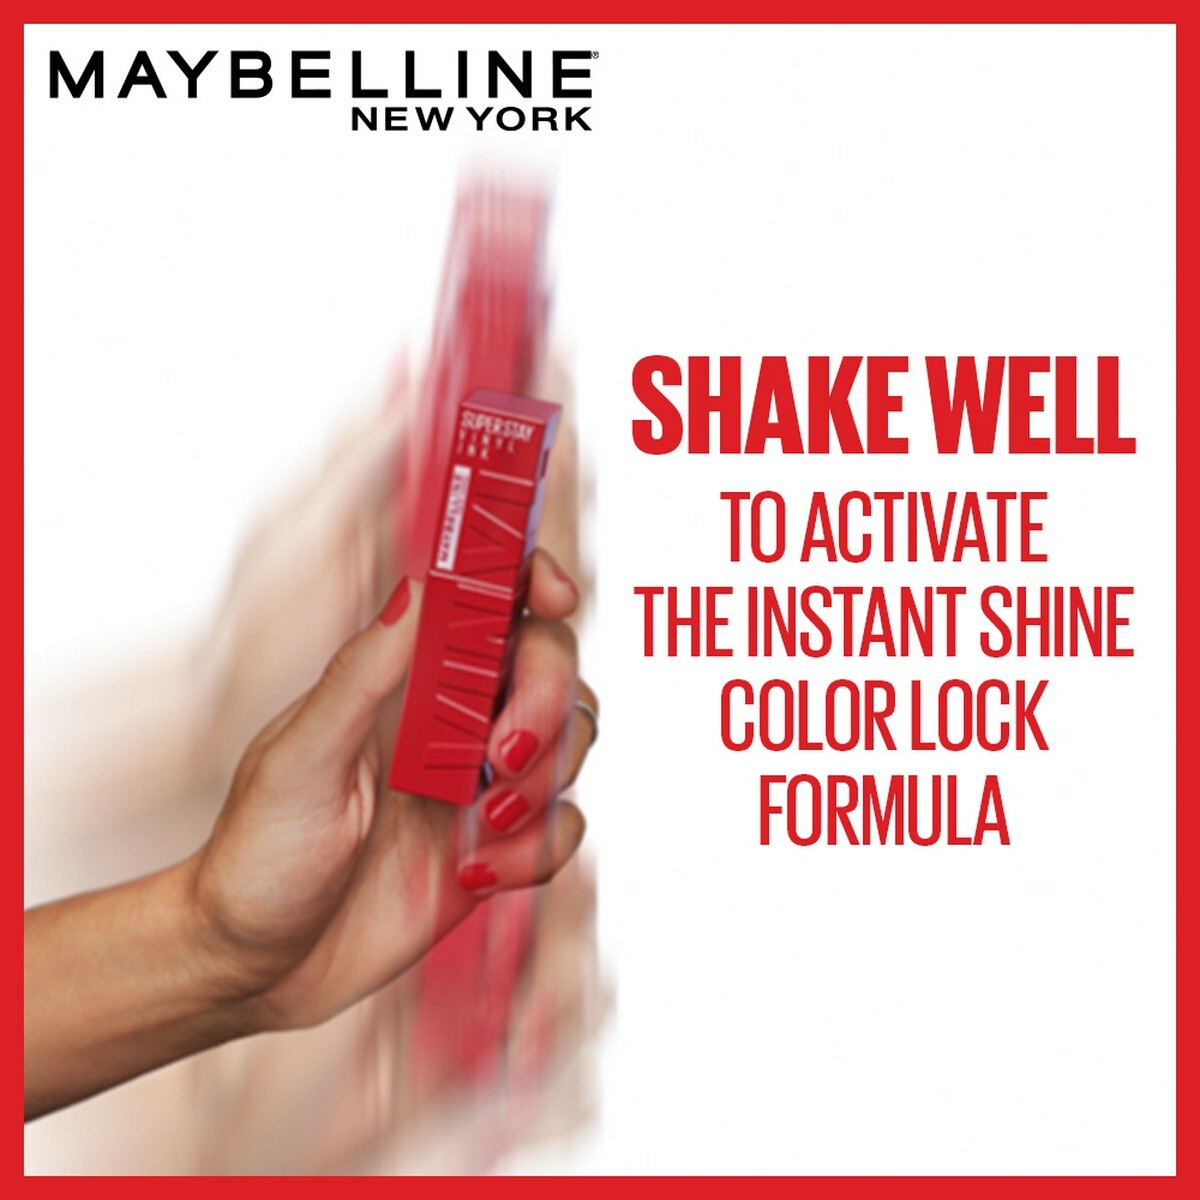 Maybelline Superstay Vinyl Ink Liquid Lipstick, Peachy , High Shine That Lasts for 16 HRs , Enriched With Vitamin E & Aloe